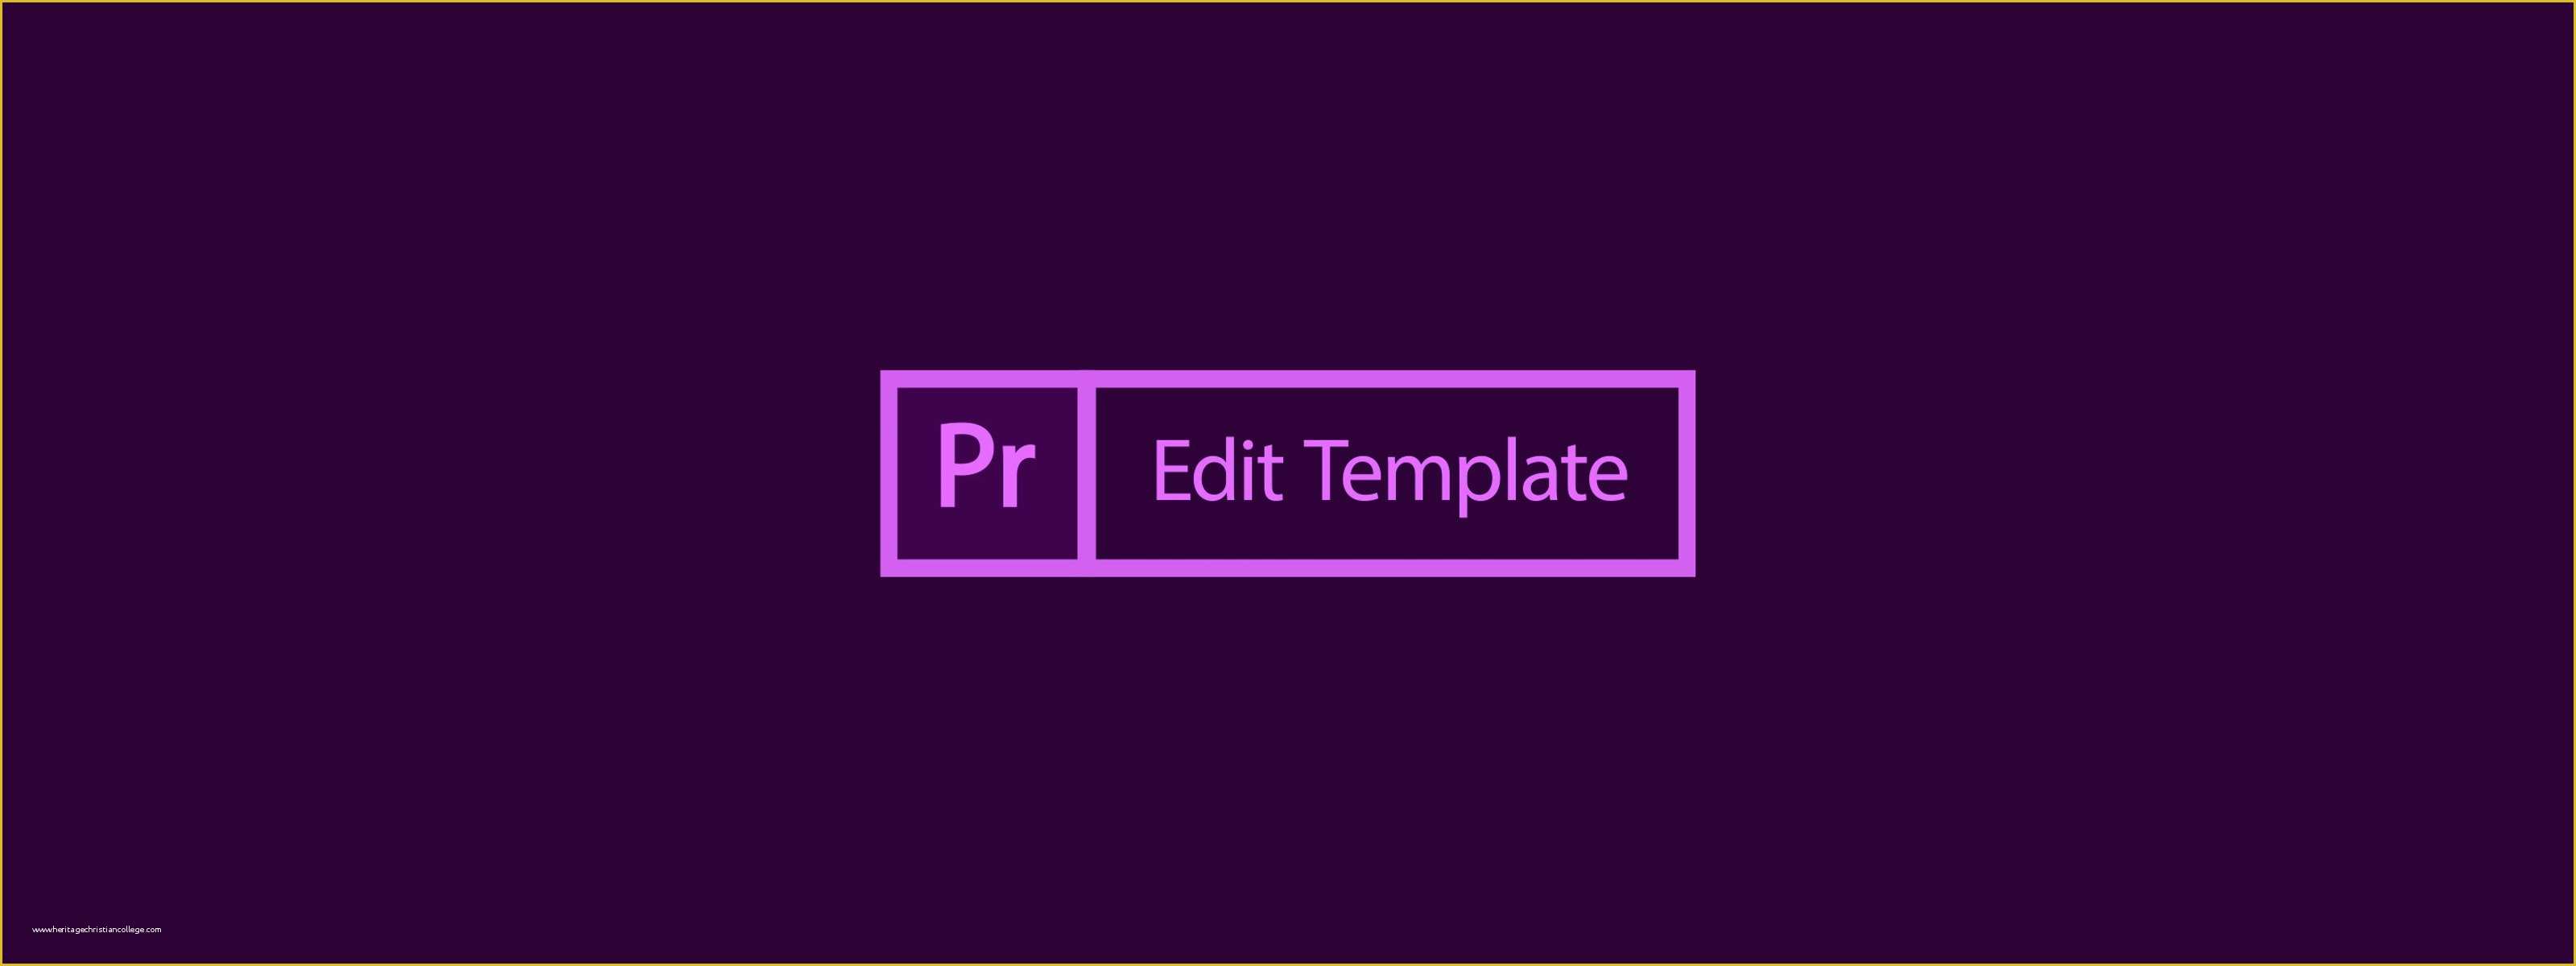 Free Motion Graphics Templates for Premiere Pro Of Free Premiere Pro Edit Template